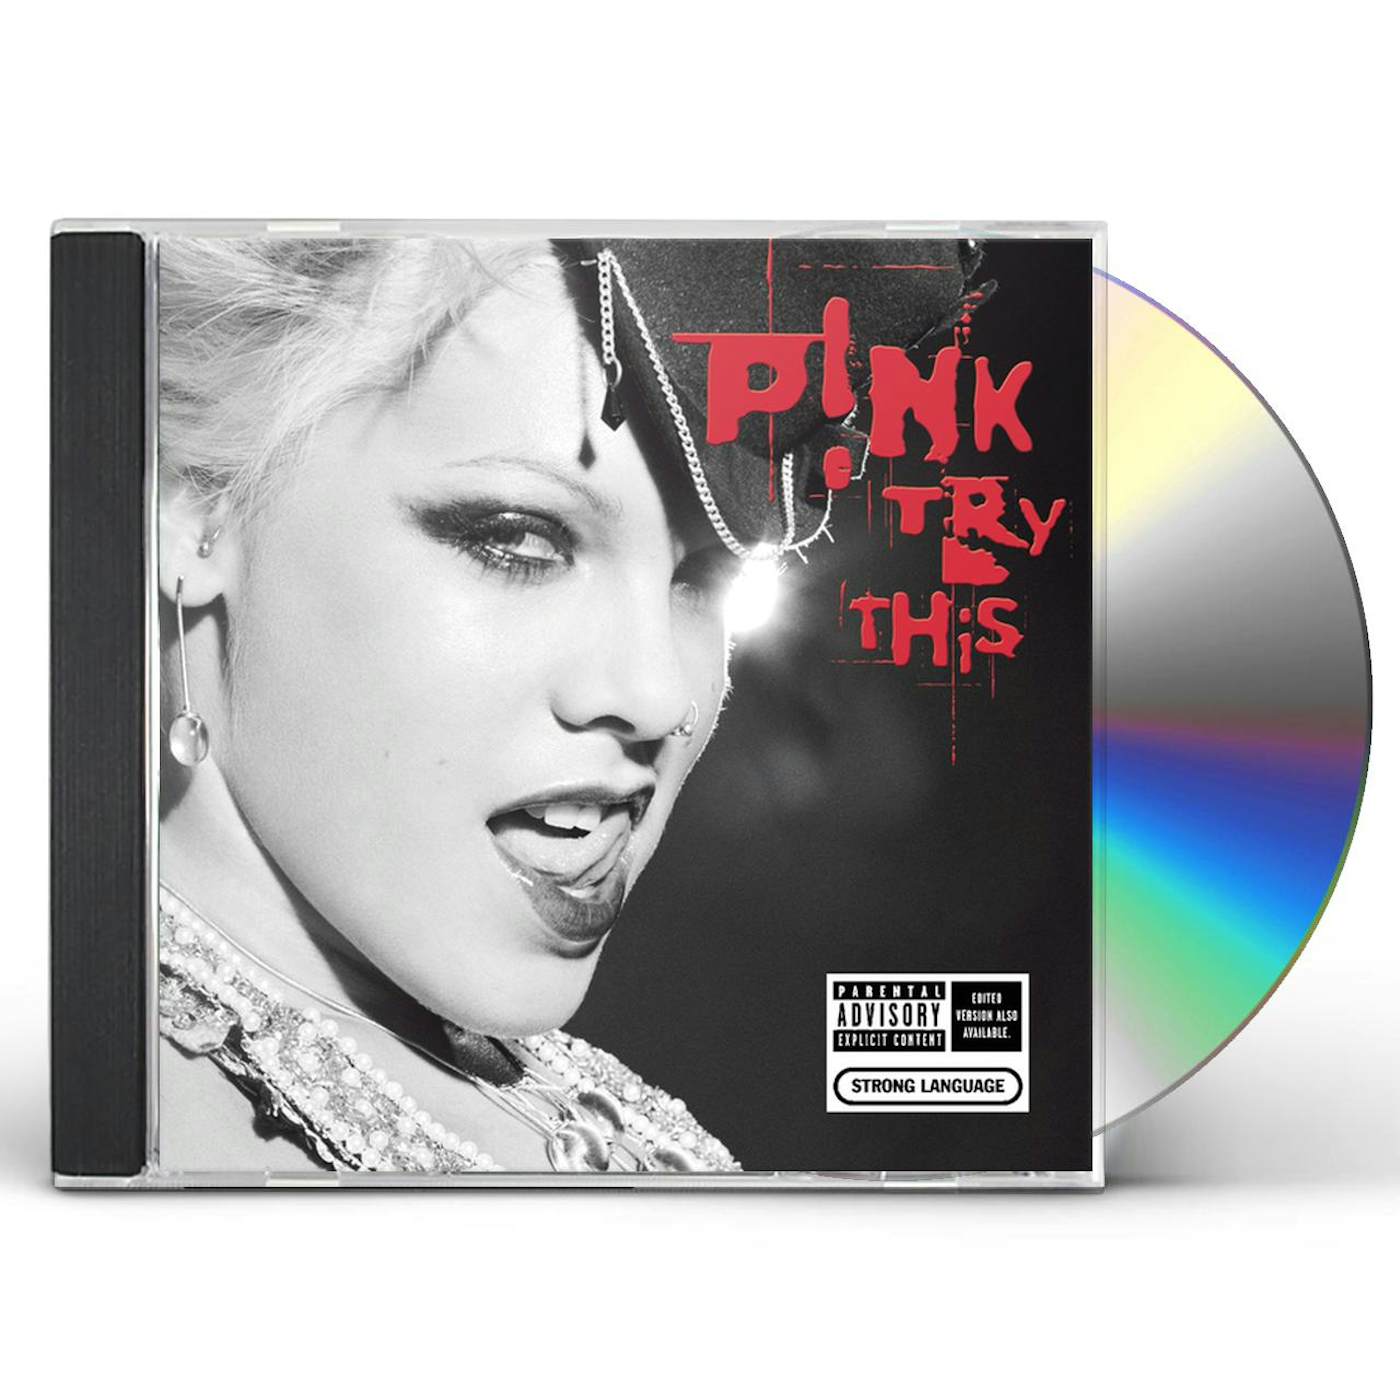 P!nk TRY THIS CD